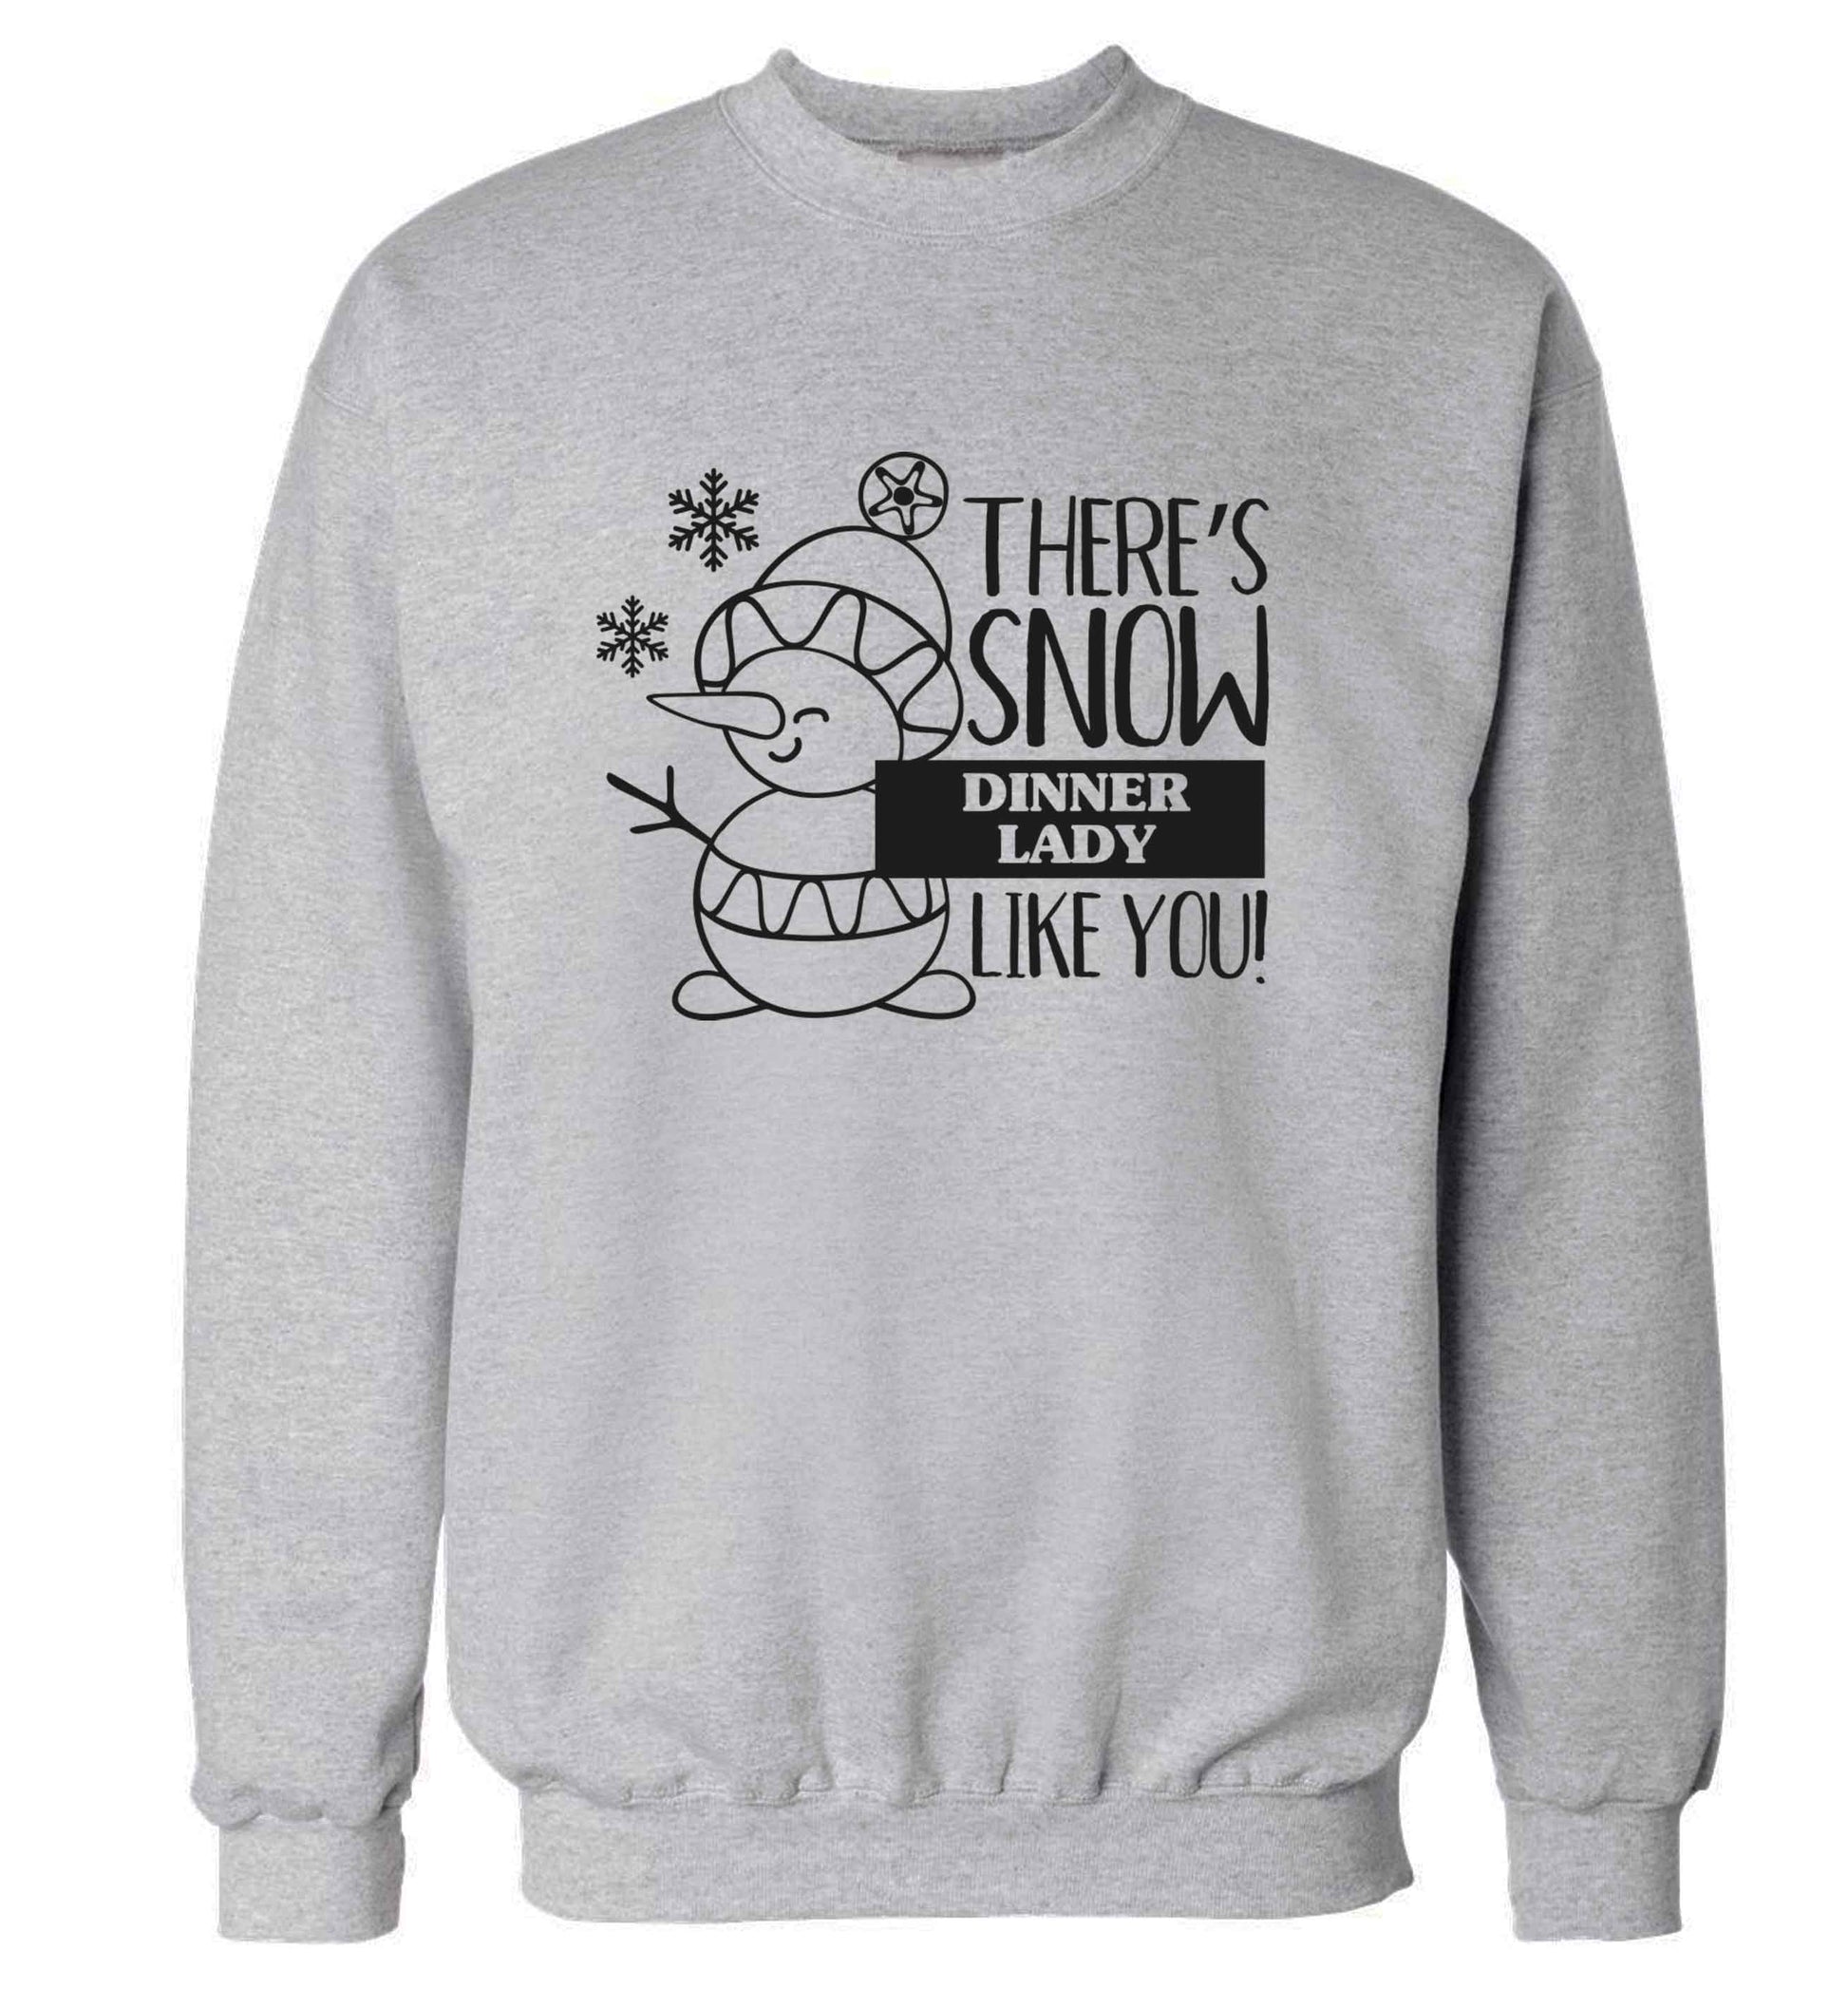 There's snow dinner lady like you adult's unisex grey sweater 2XL